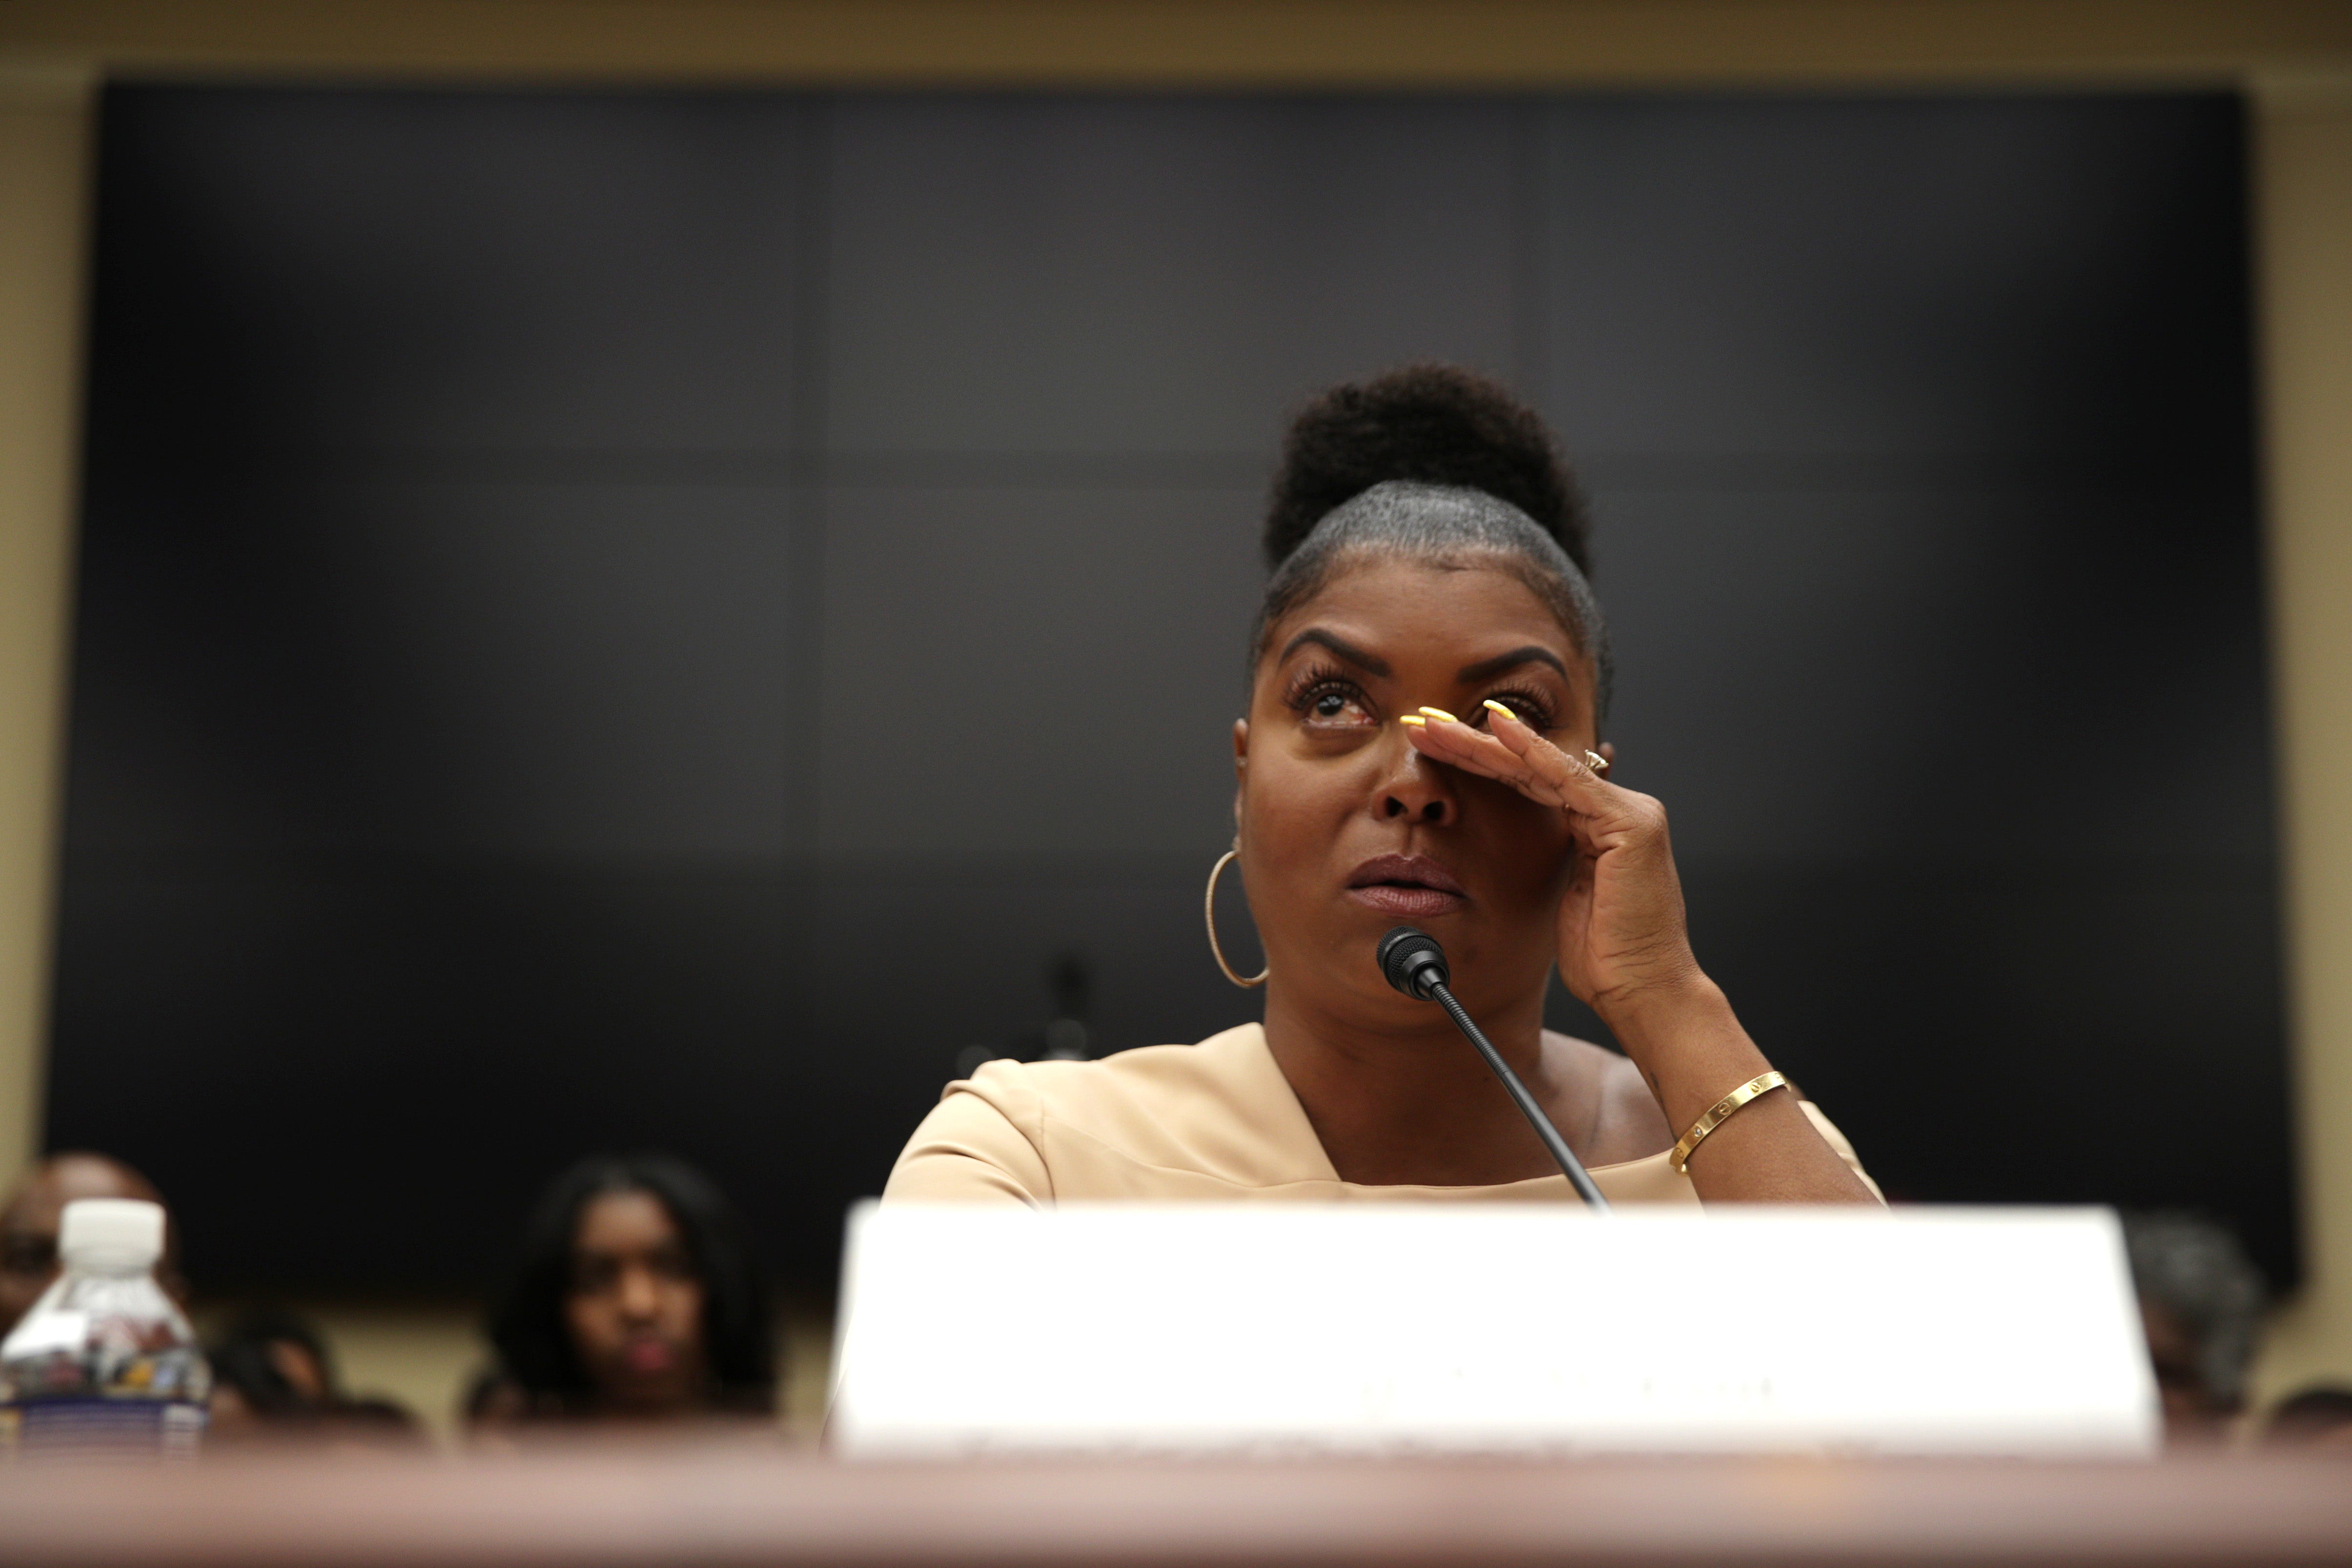 Taraji P. Henson Gives An Emotional Testimony To Congress On Mental Health Among Black Youth: 'This Is A National Crisis'